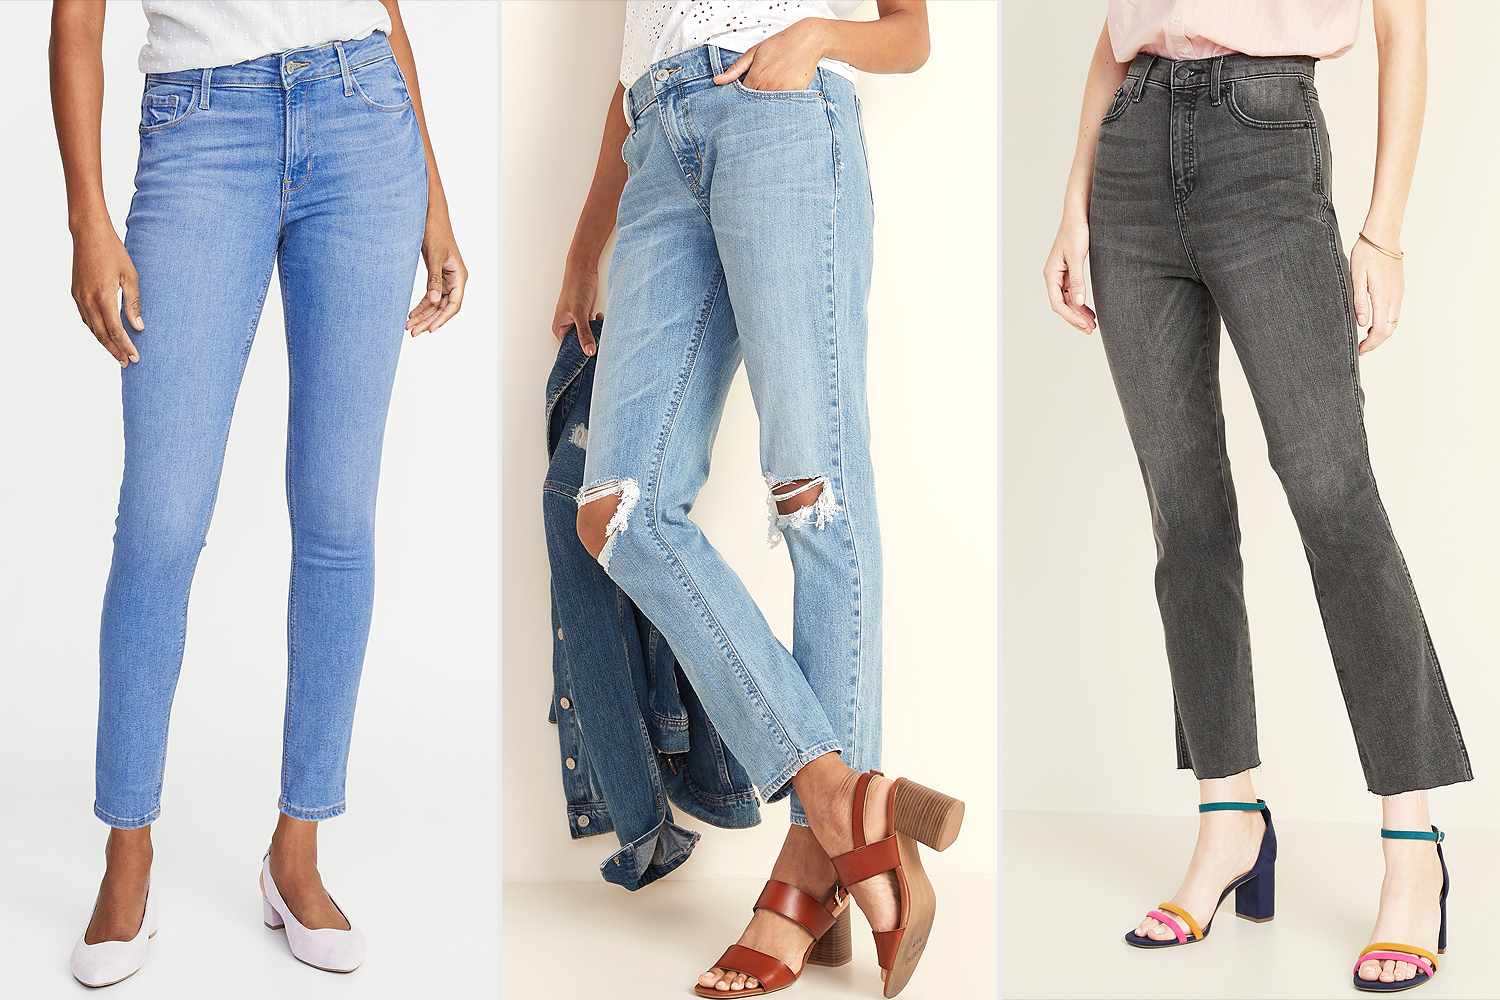 jeans old navy sale